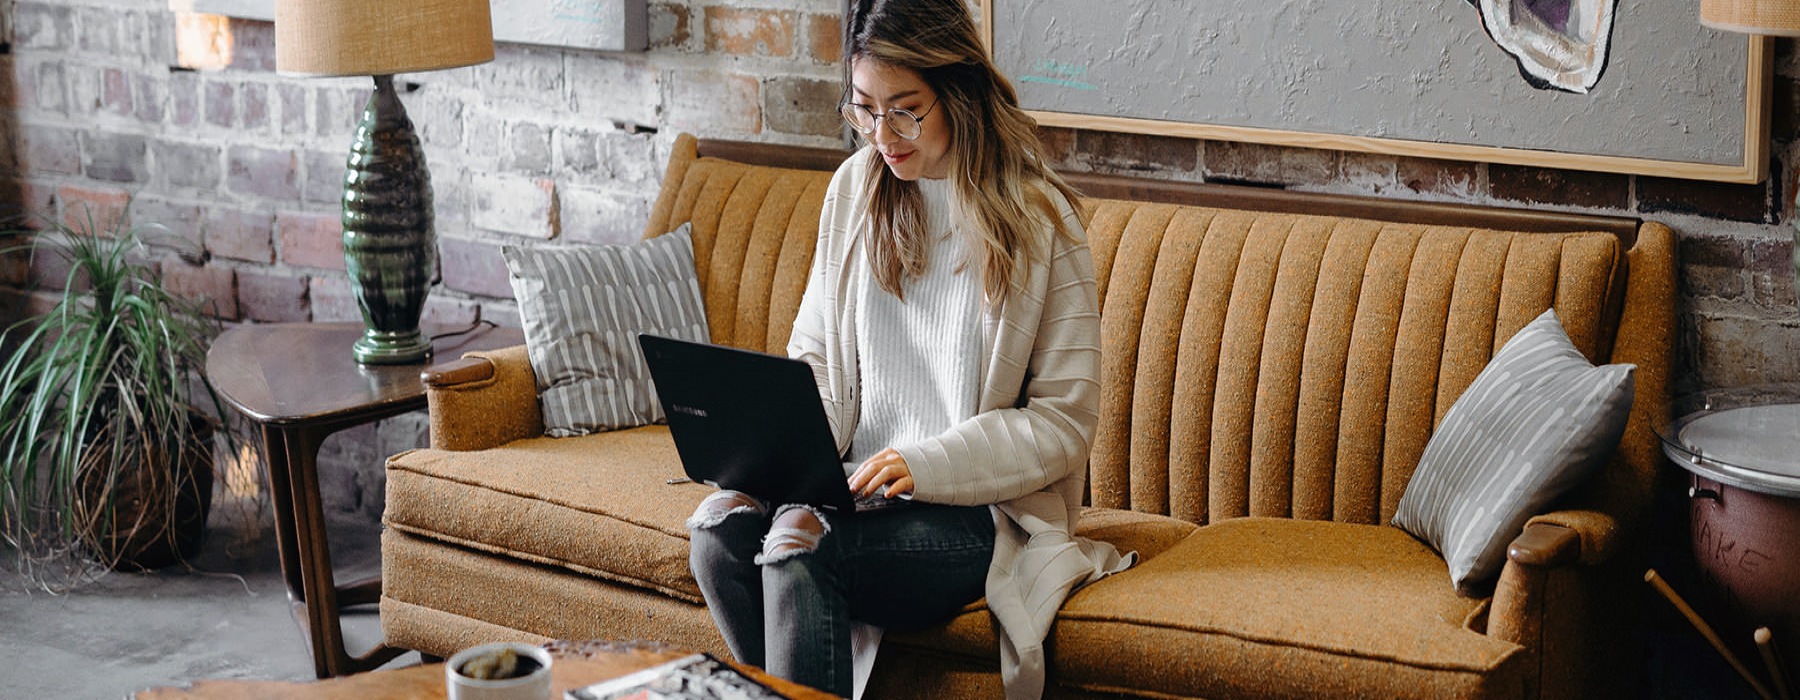 young woman sits on a cafe couch while working on her laptops